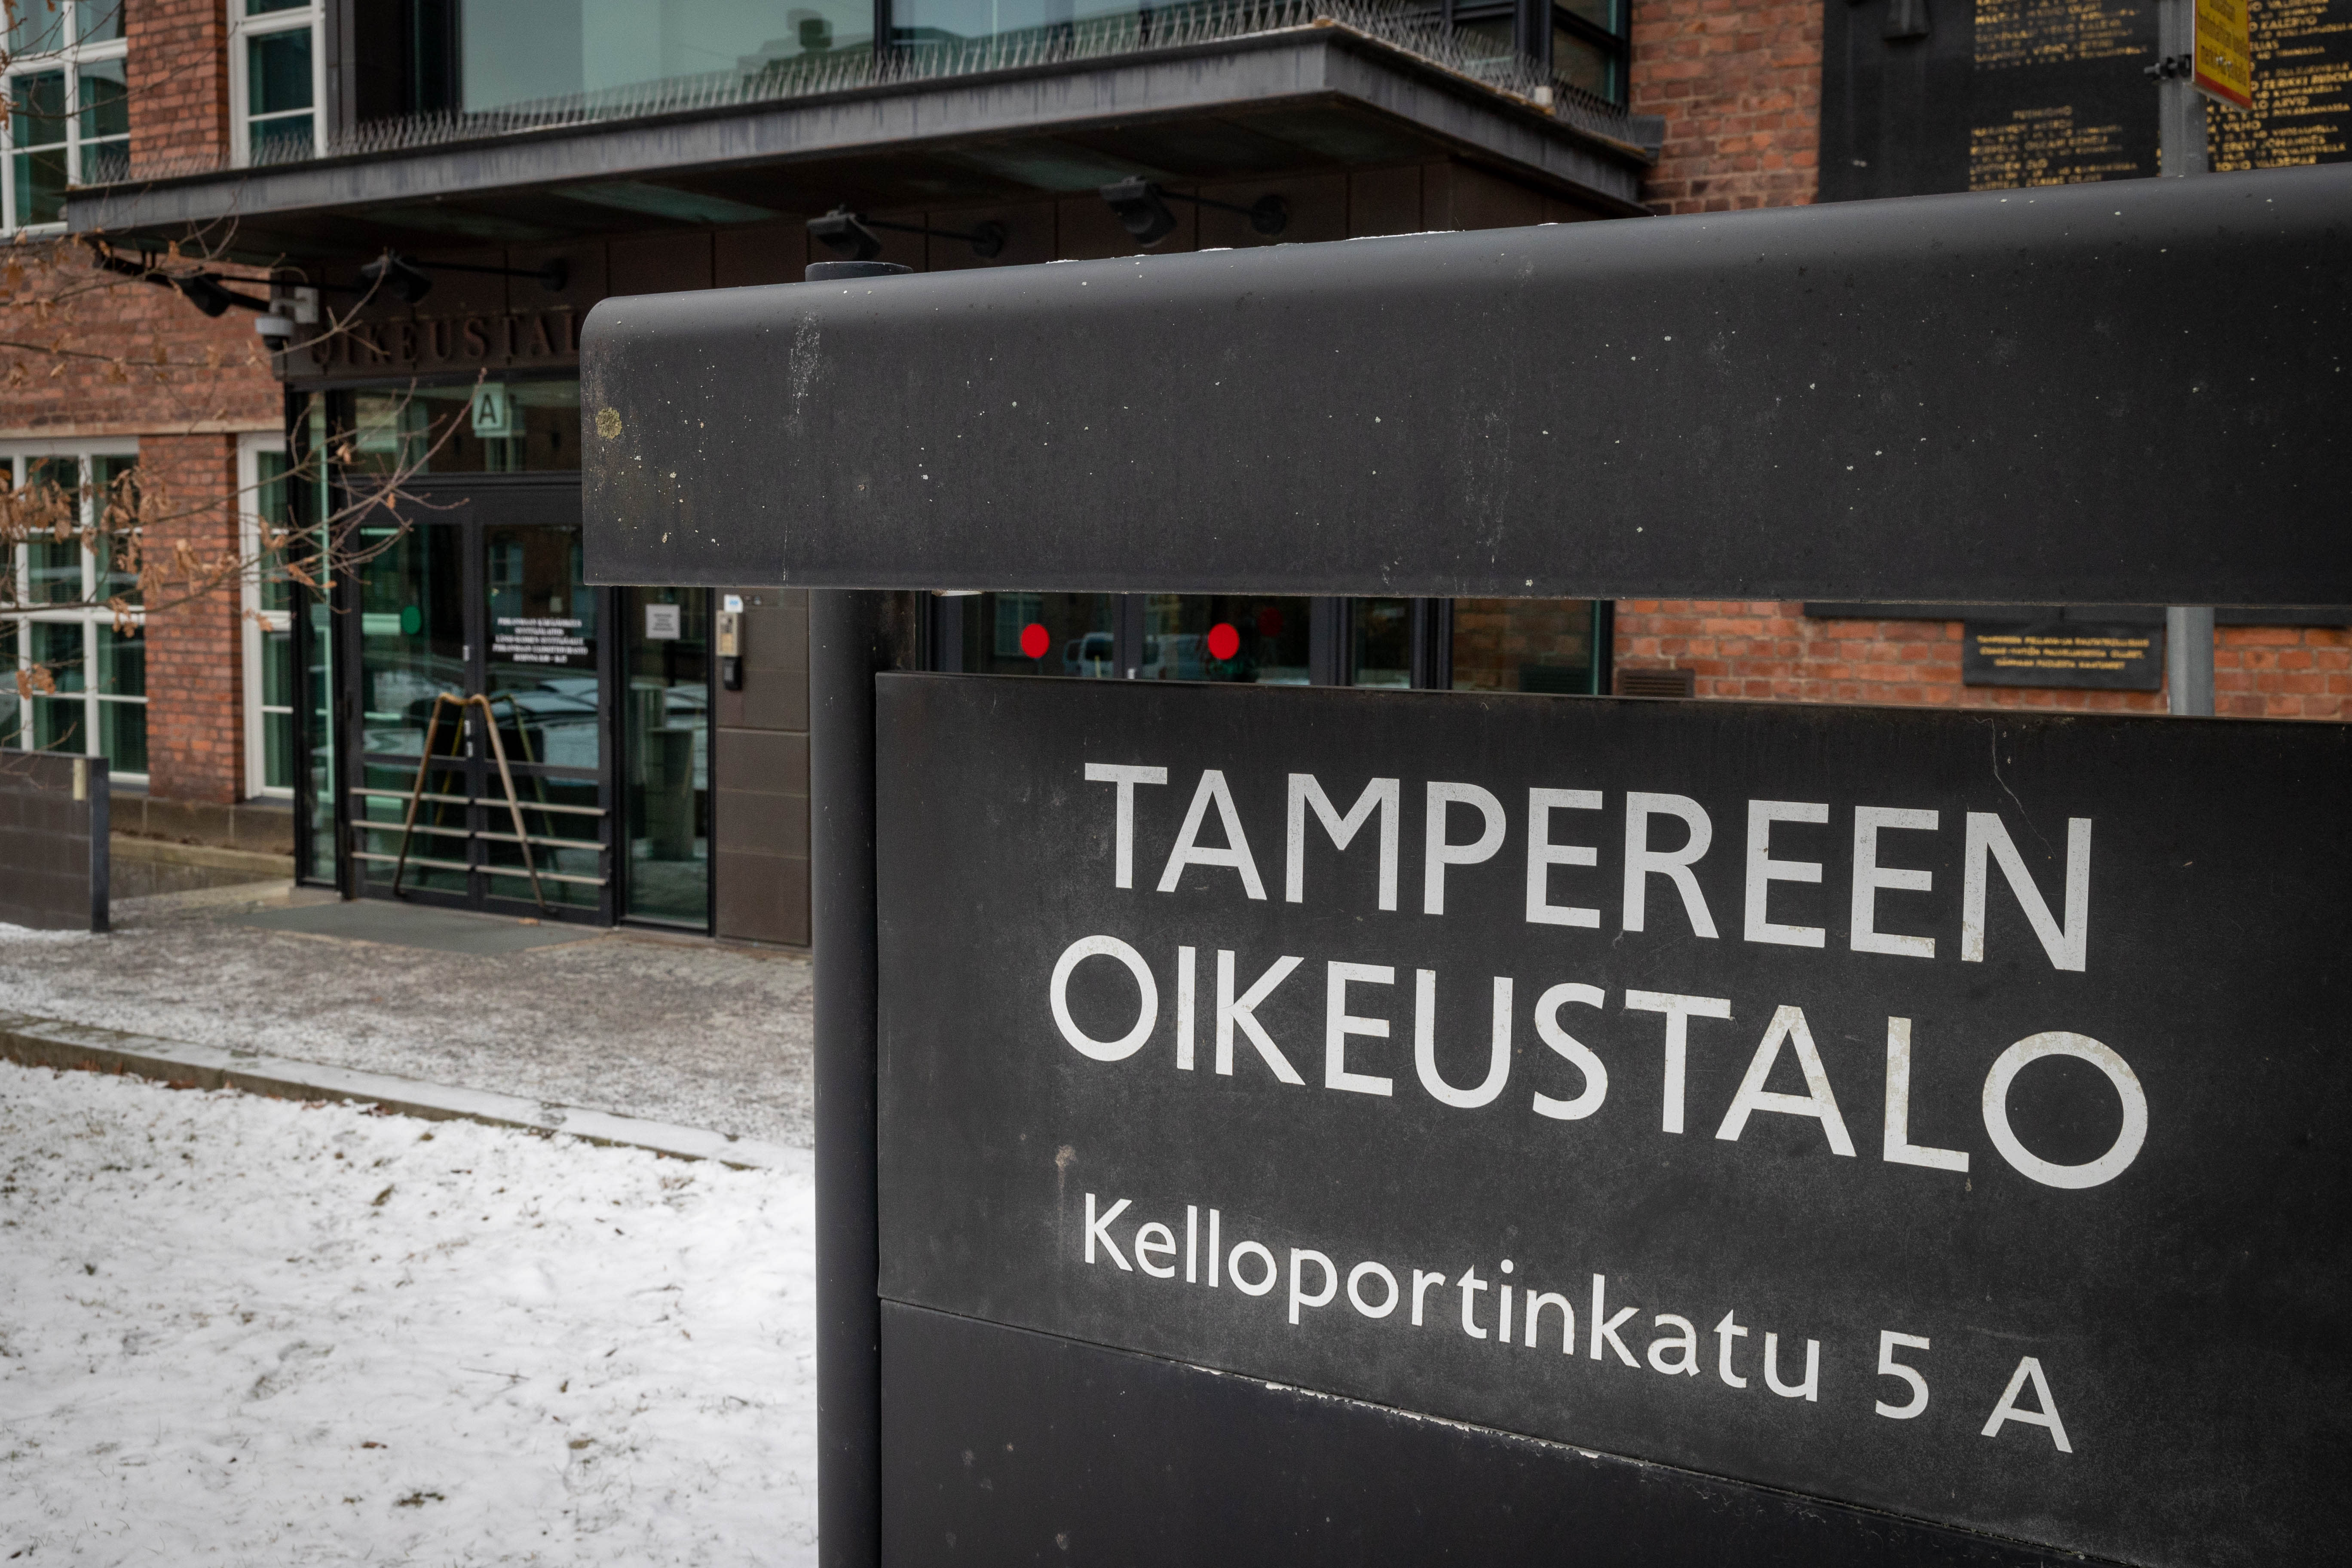 The Tampere district court arrested the taxi driver who caused the death